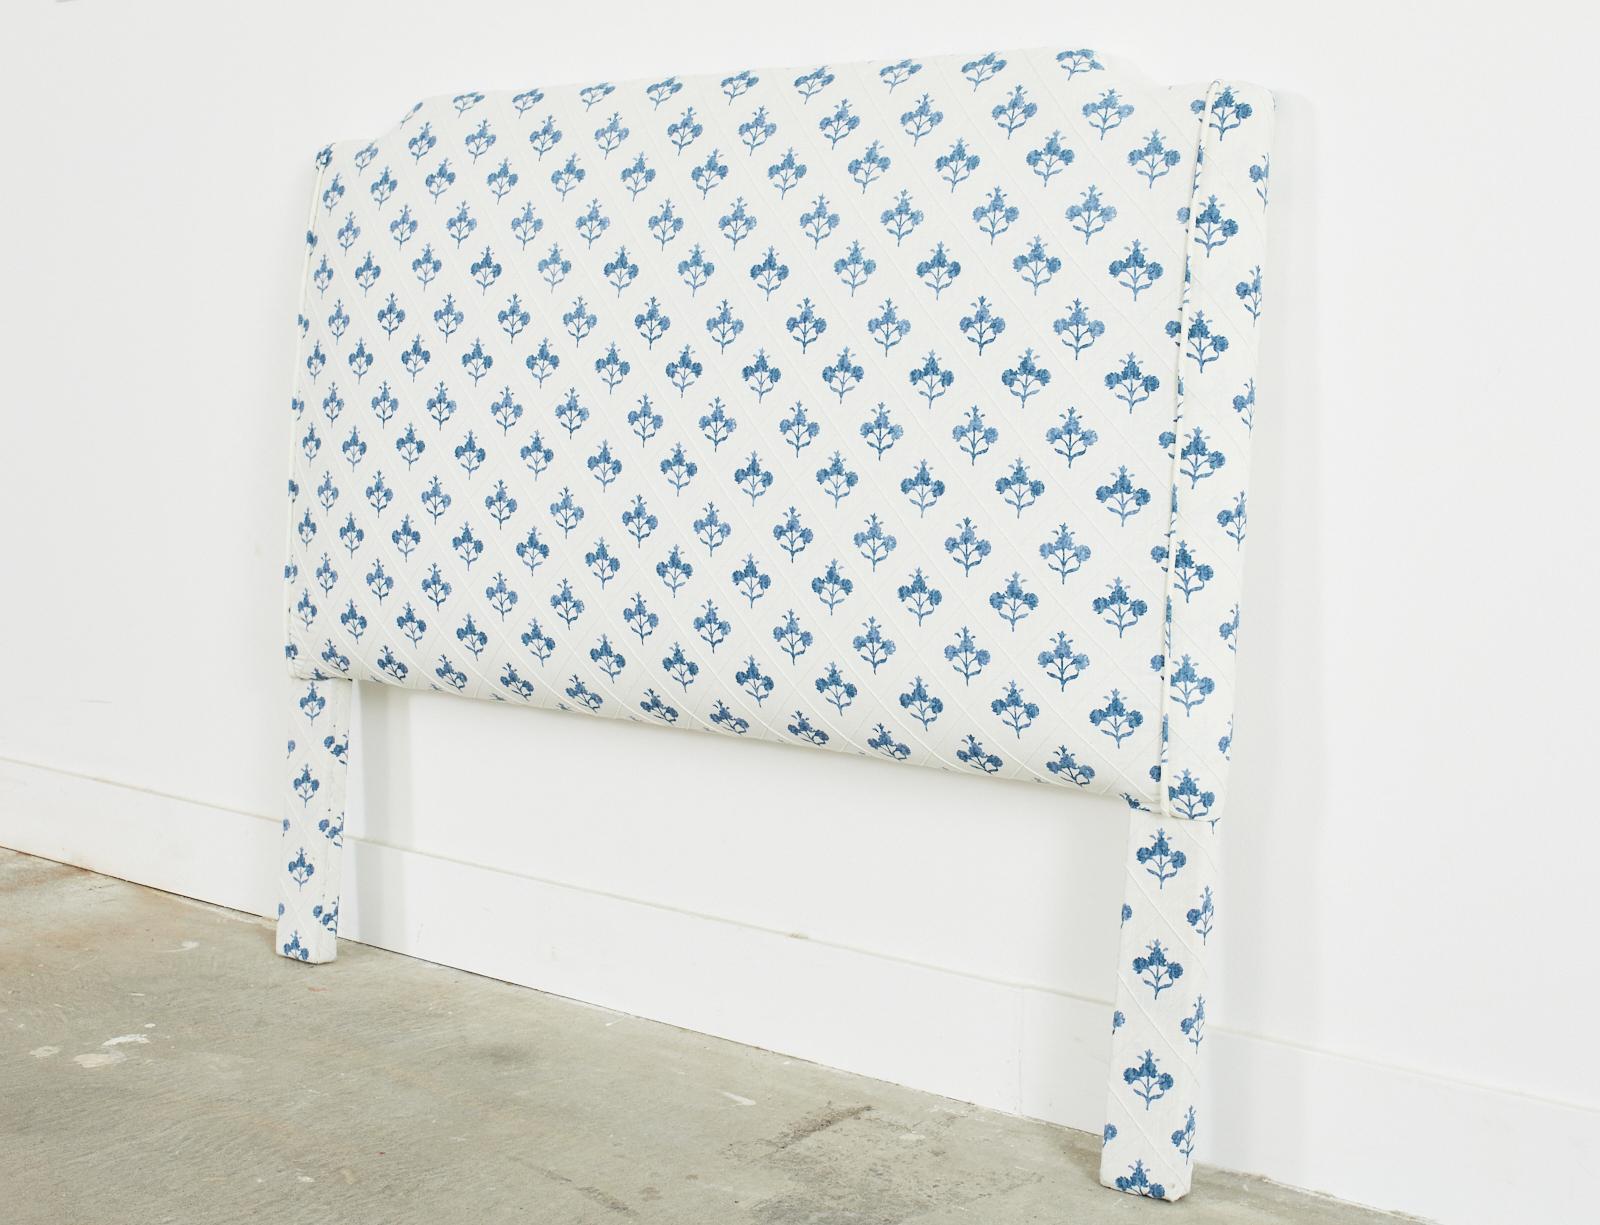 Stylish full sized padded headboard redux featuring a block print blue and white linen style upholstery with a geometric diamond pattern background. The print design is decorated with indigo blue floral sprays in an aged patina. The vintage